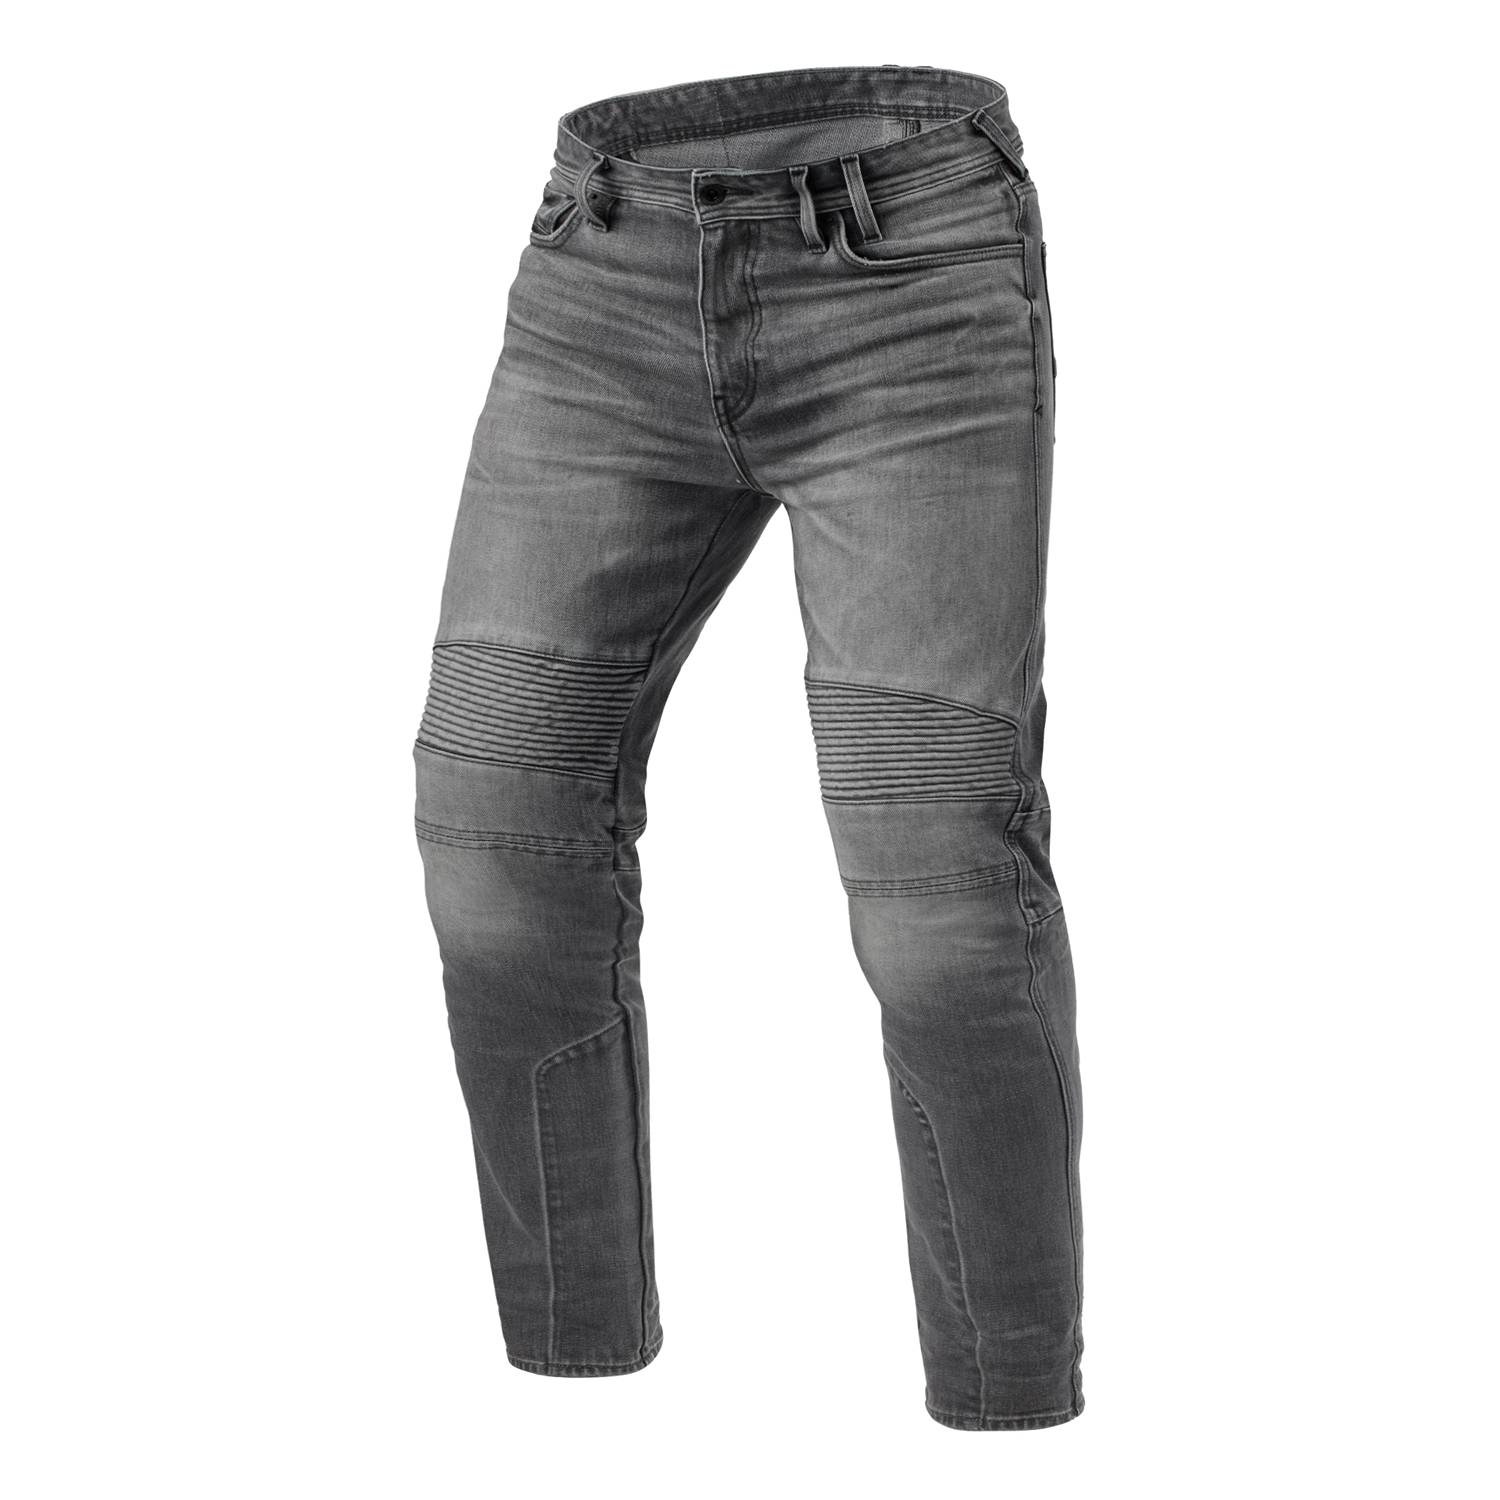 Image of EU REV'IT! Jeans Moto 2 TF Medium Grey Used L34 Motorcycle Jeans Taille L34/W30